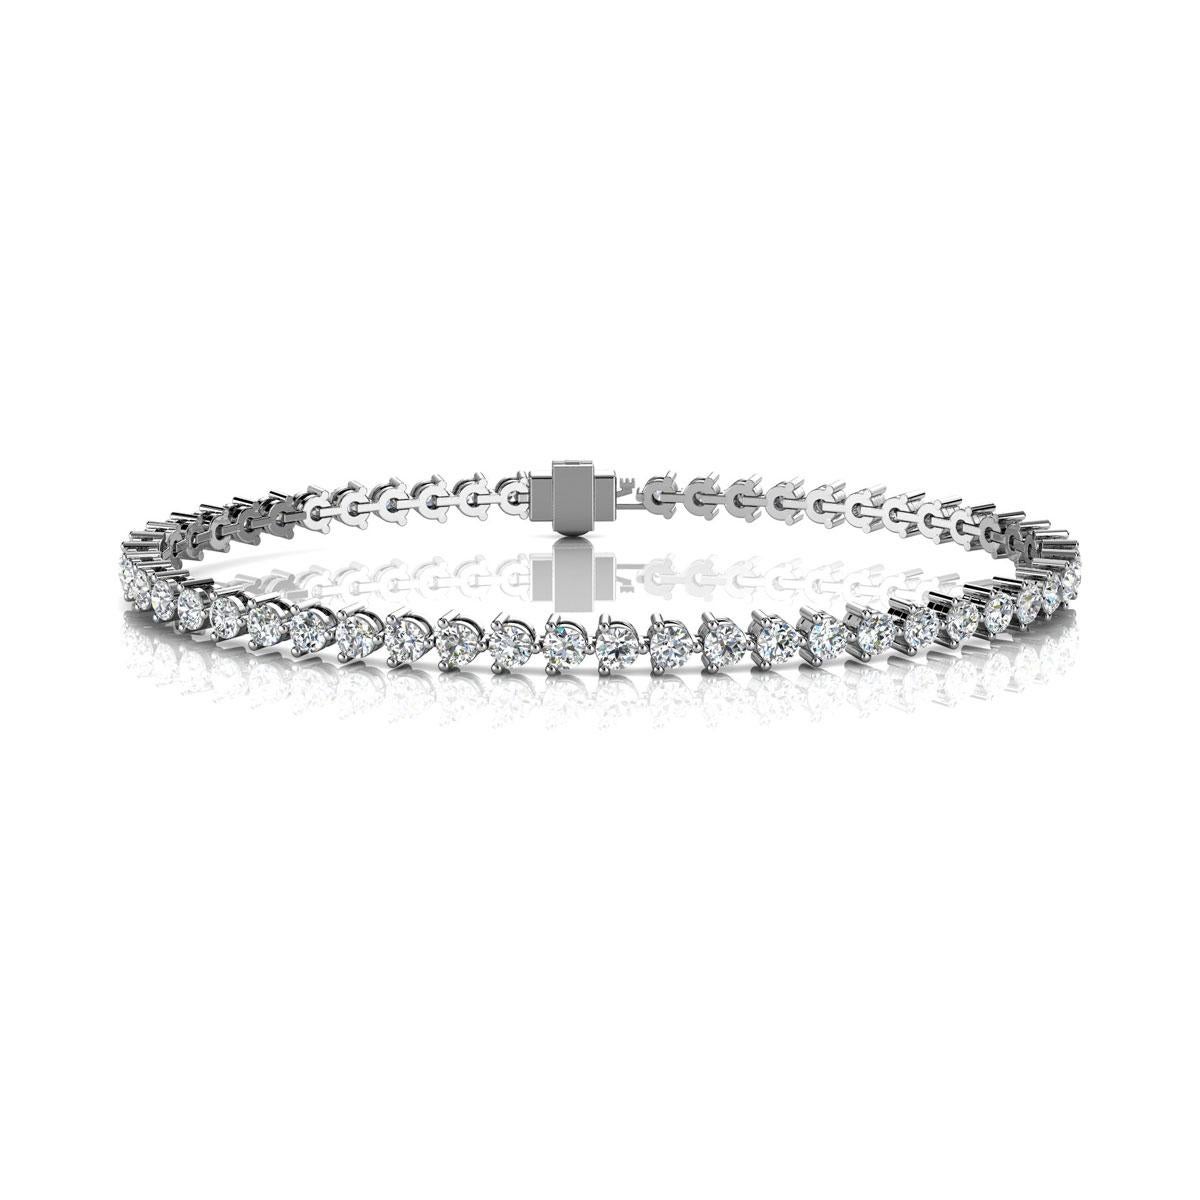 A timeless three prongs diamonds tennis bracelet. Experience the Difference!

Product details: 

Center Gemstone Type: NATURAL DIAMOND
Center Gemstone Color: WHITE
Center Gemstone Shape: ROUND
Center Diamond Carat Weight: 4
Metal: Platinum
Metal